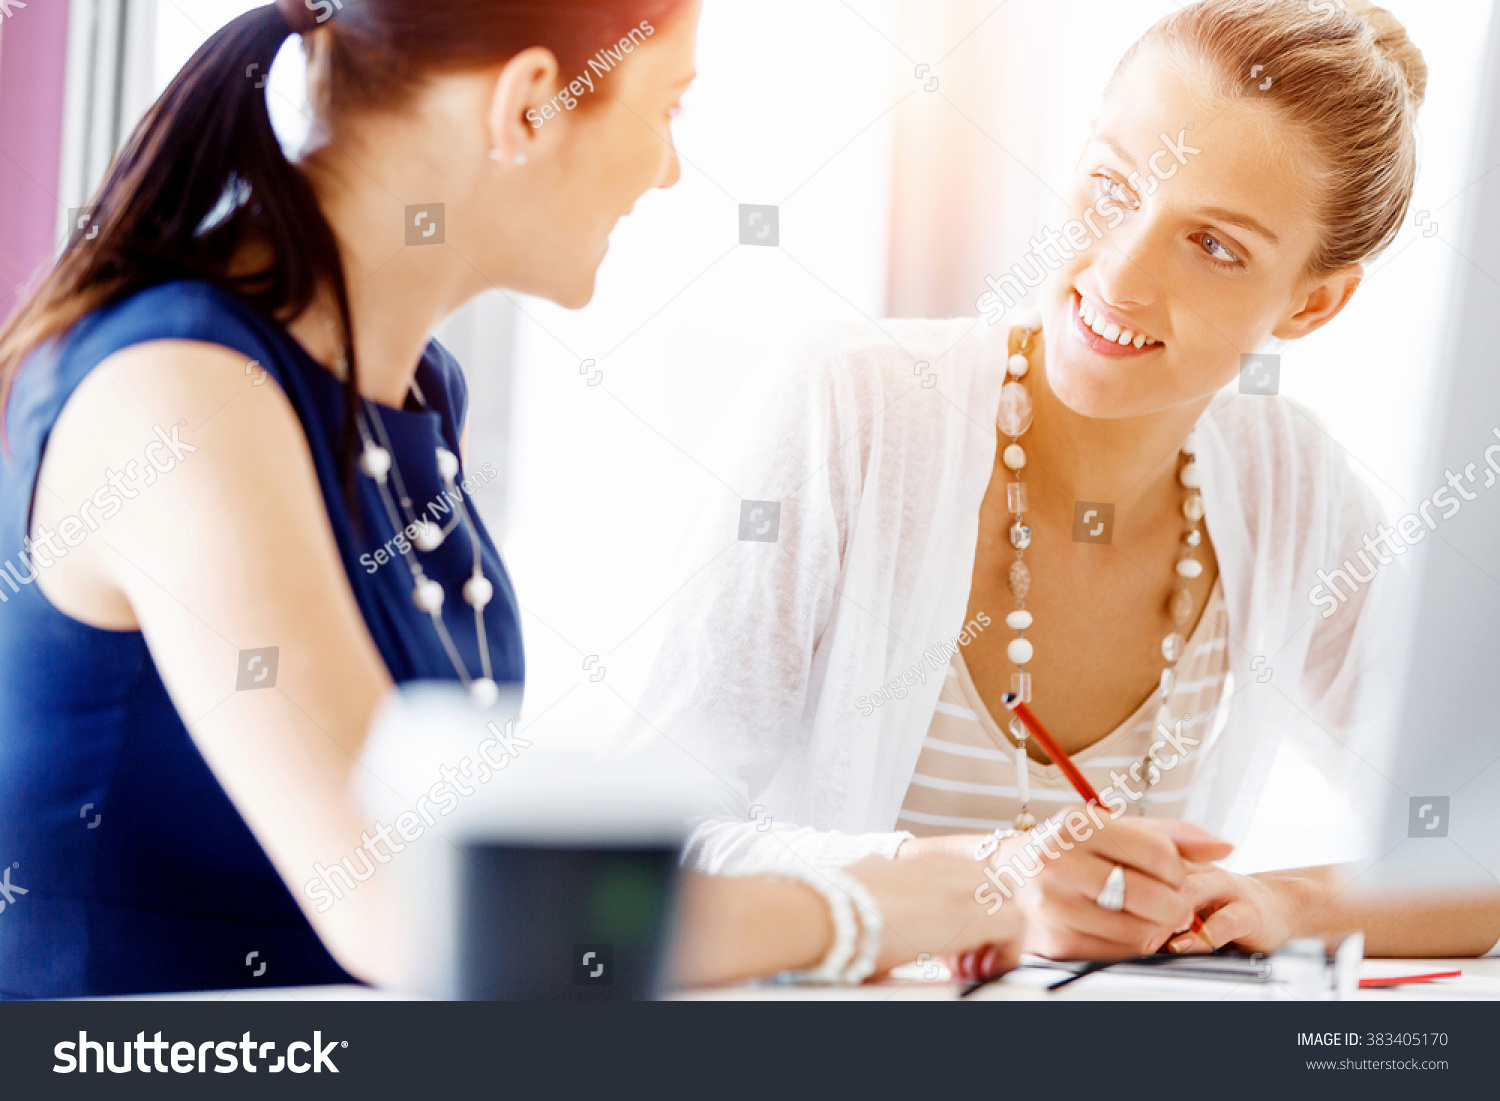 Two female colleagues in office #383405170